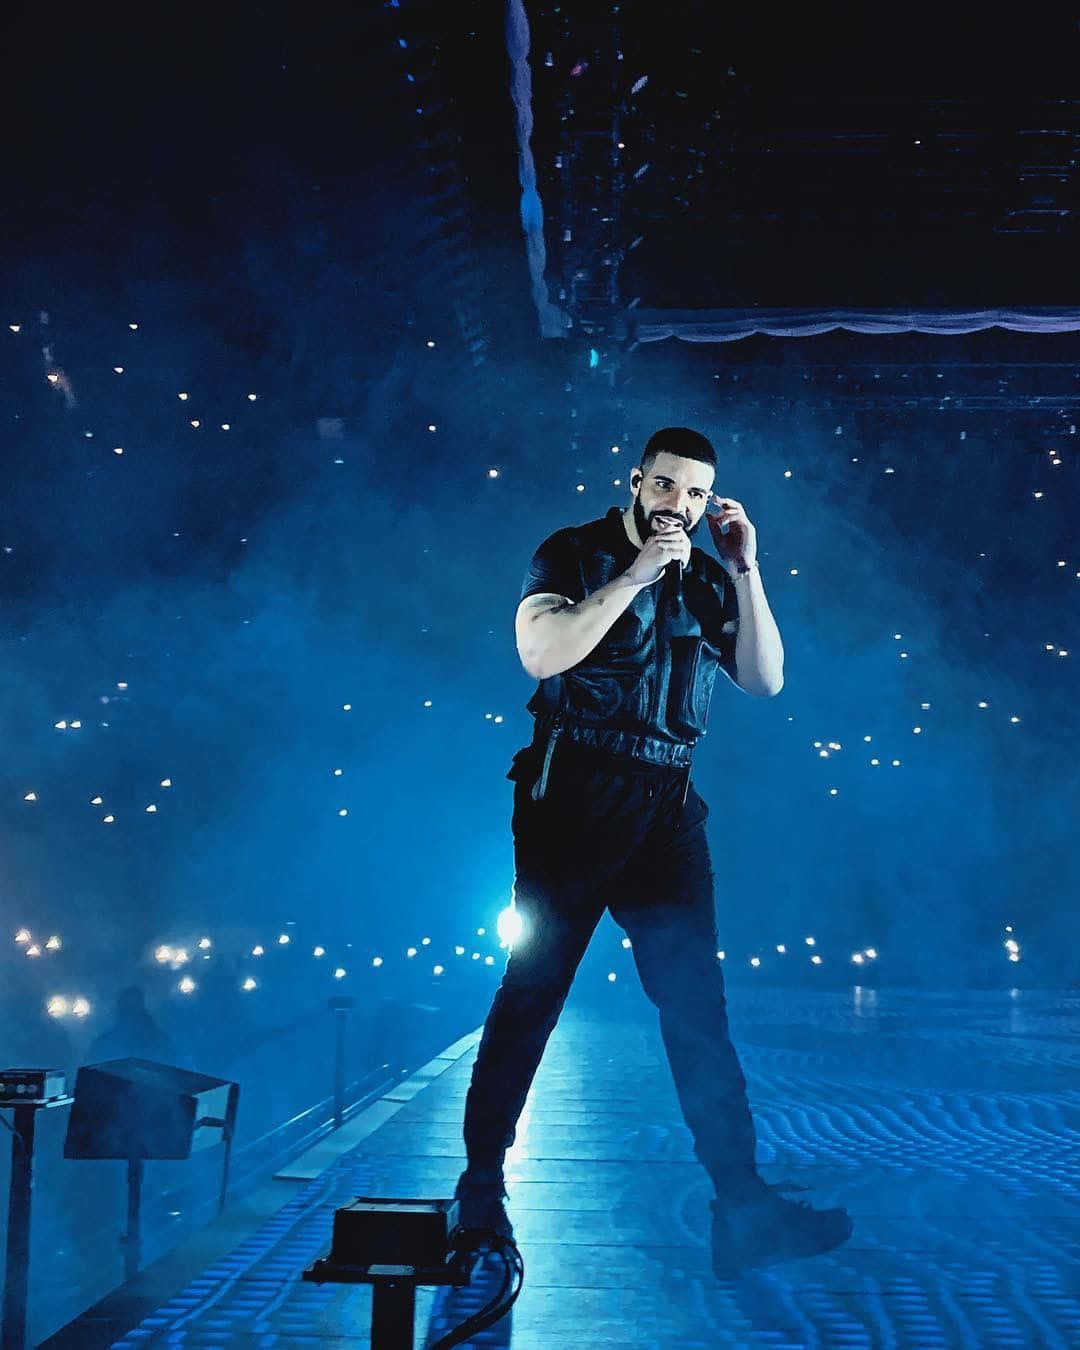 Grammy-winning rapper, singer and songwriter Drake making his mark in the music industry.